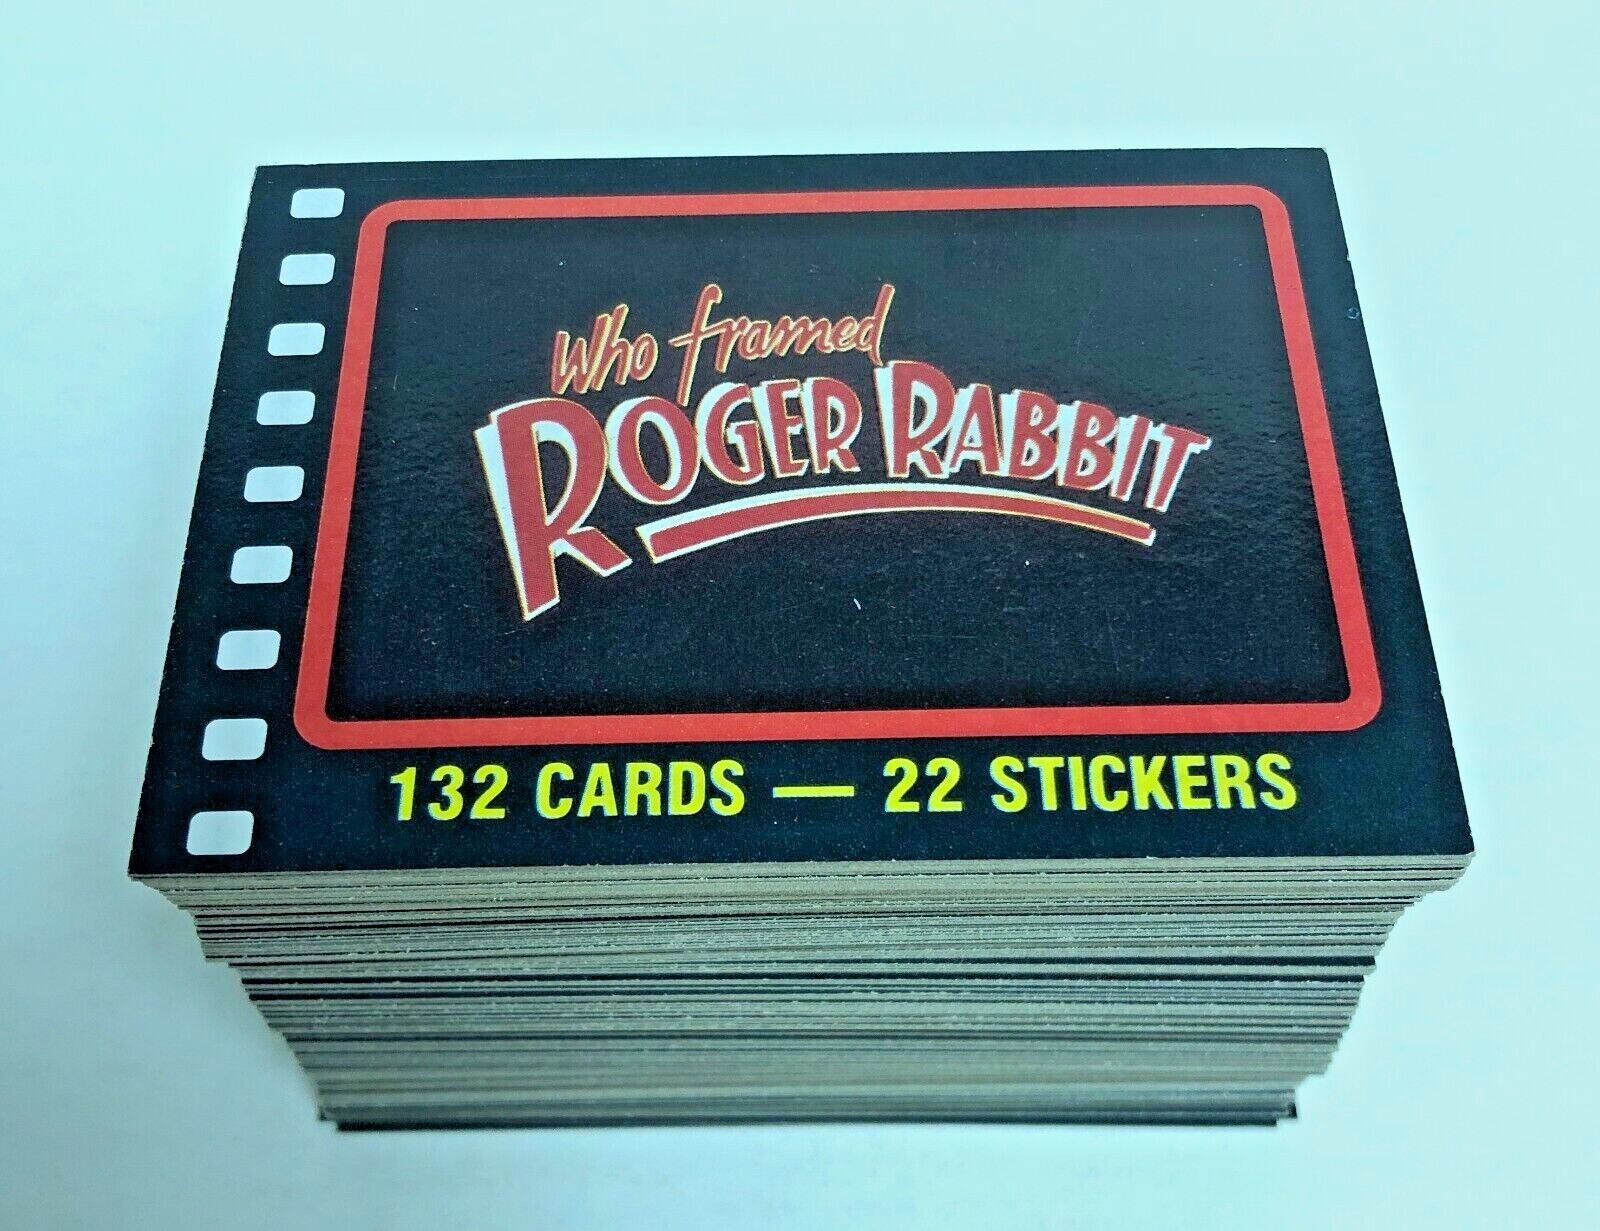 1987 Roger Rabbit Complete Collector Movie Card Set 1-132 Plus All 22 Stickers